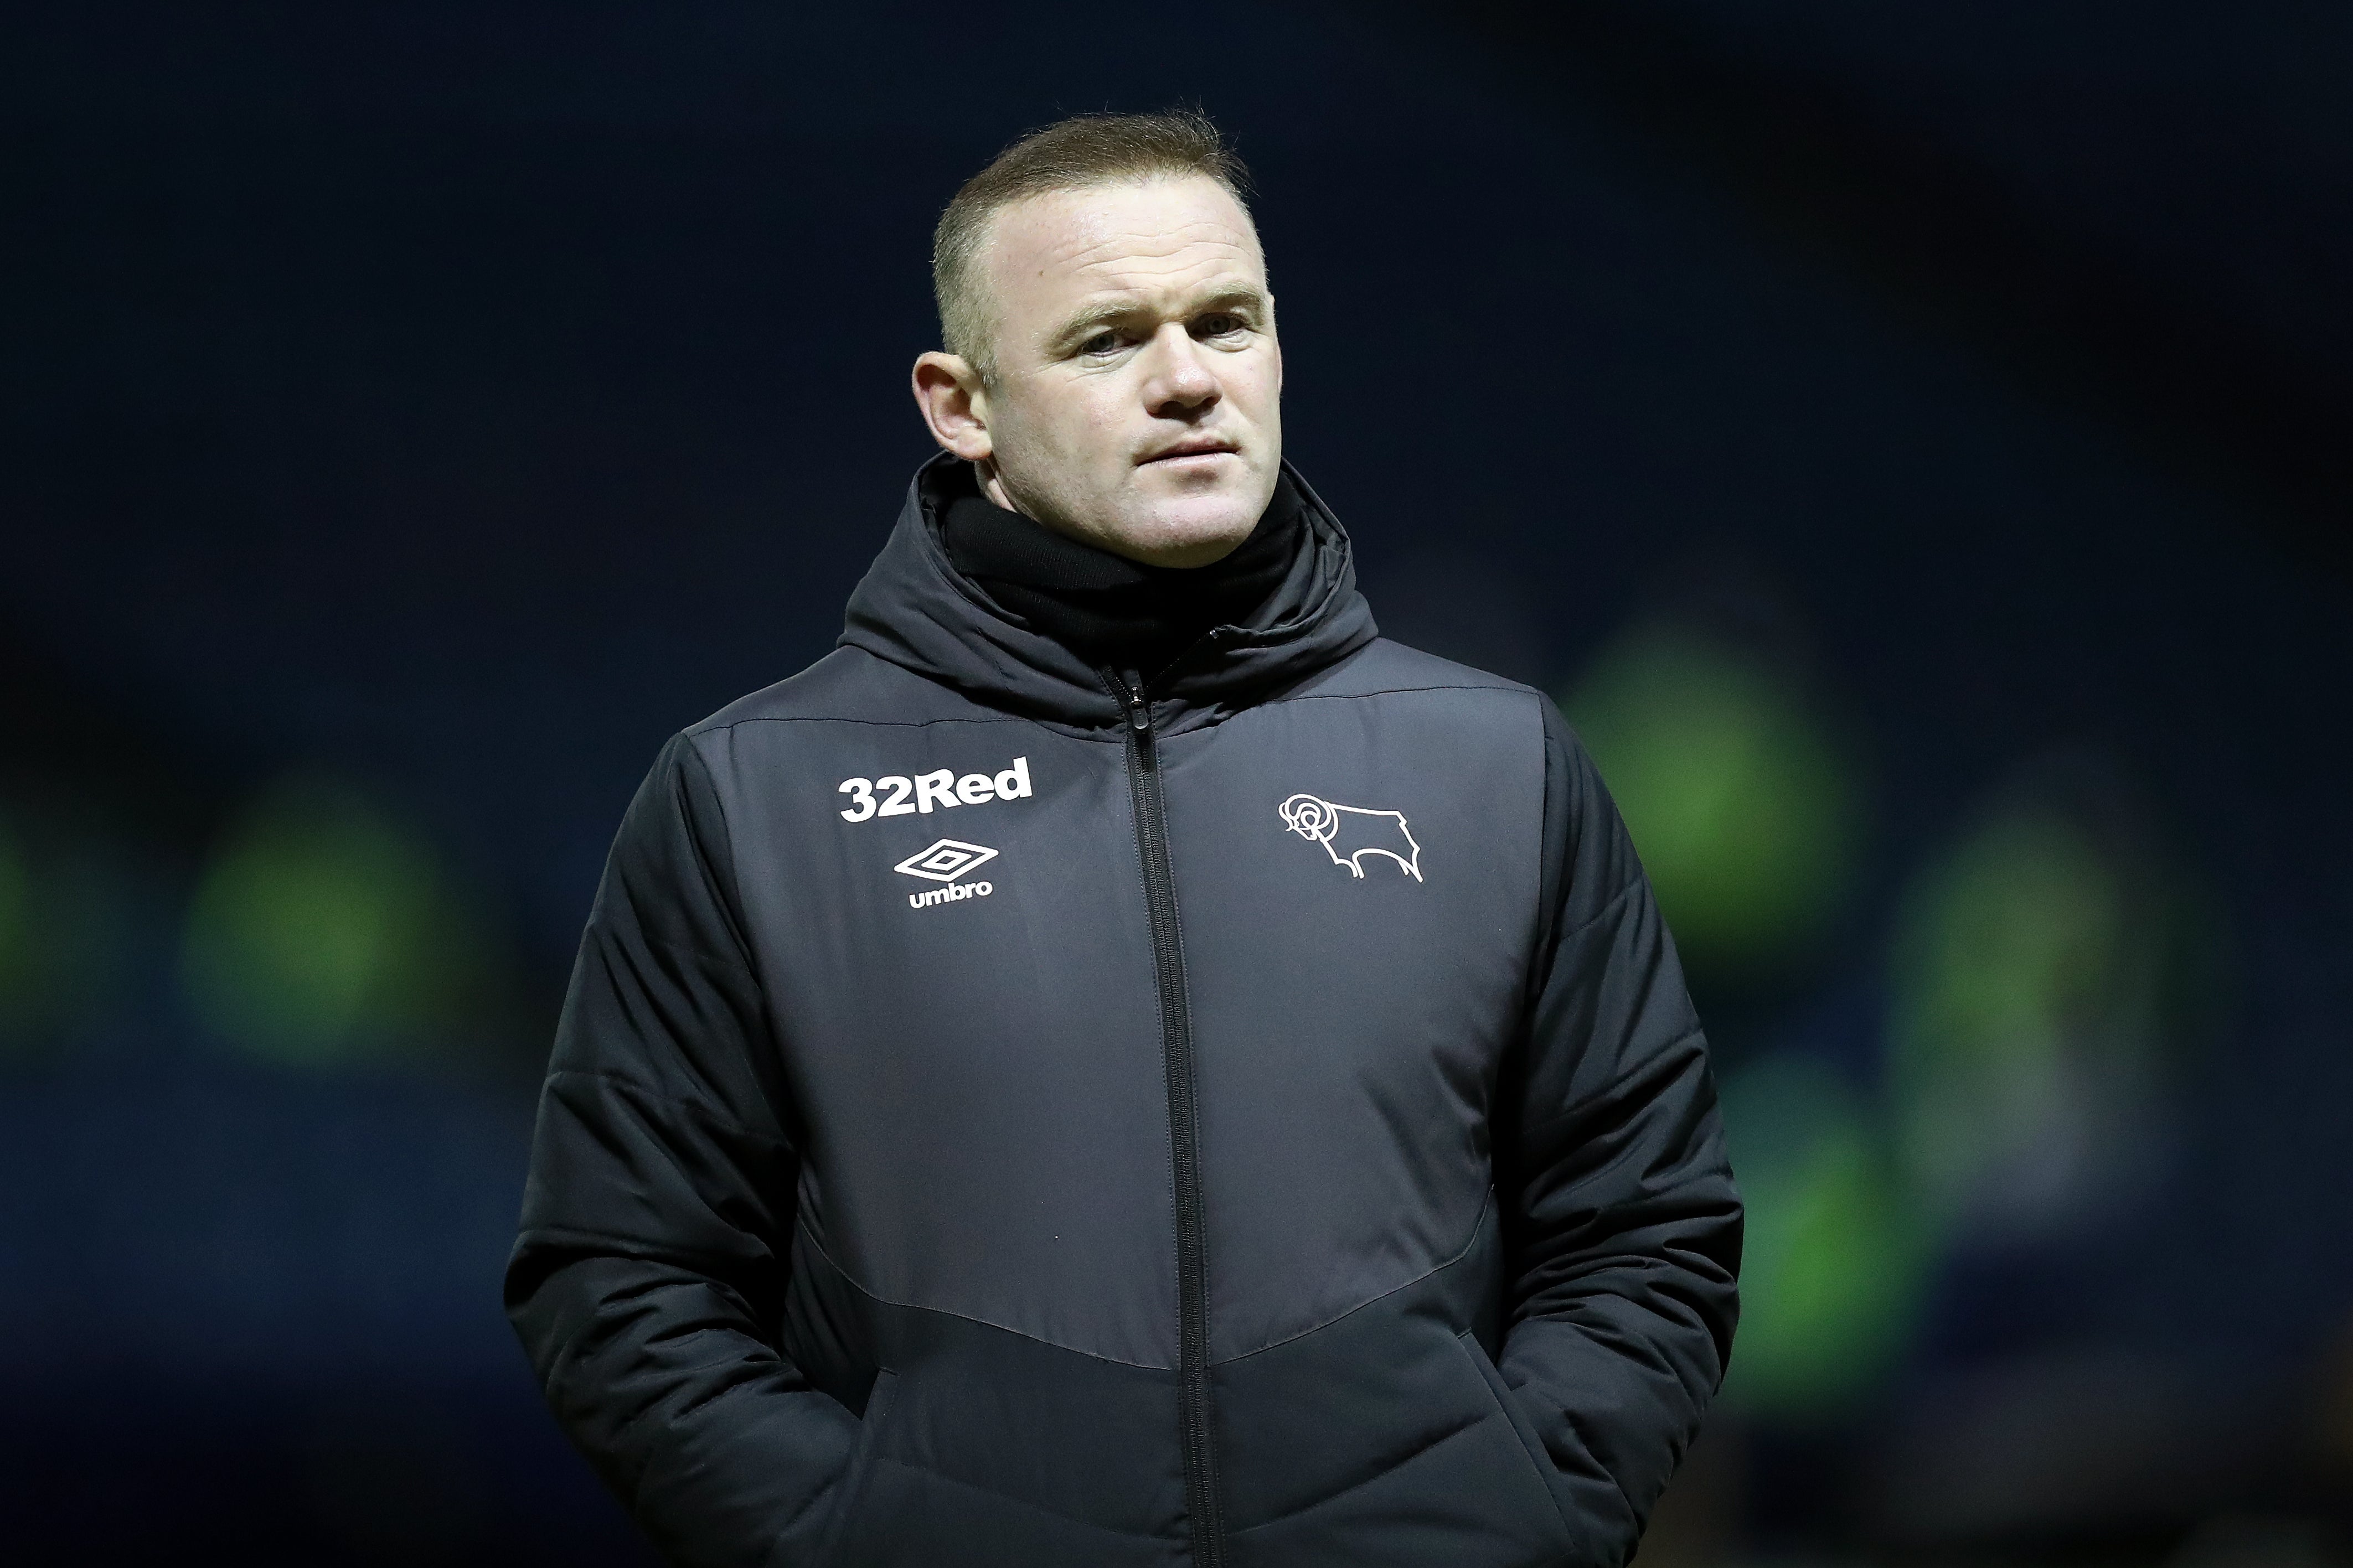 Wayne Rooney has signed a two-and-a-half year deal